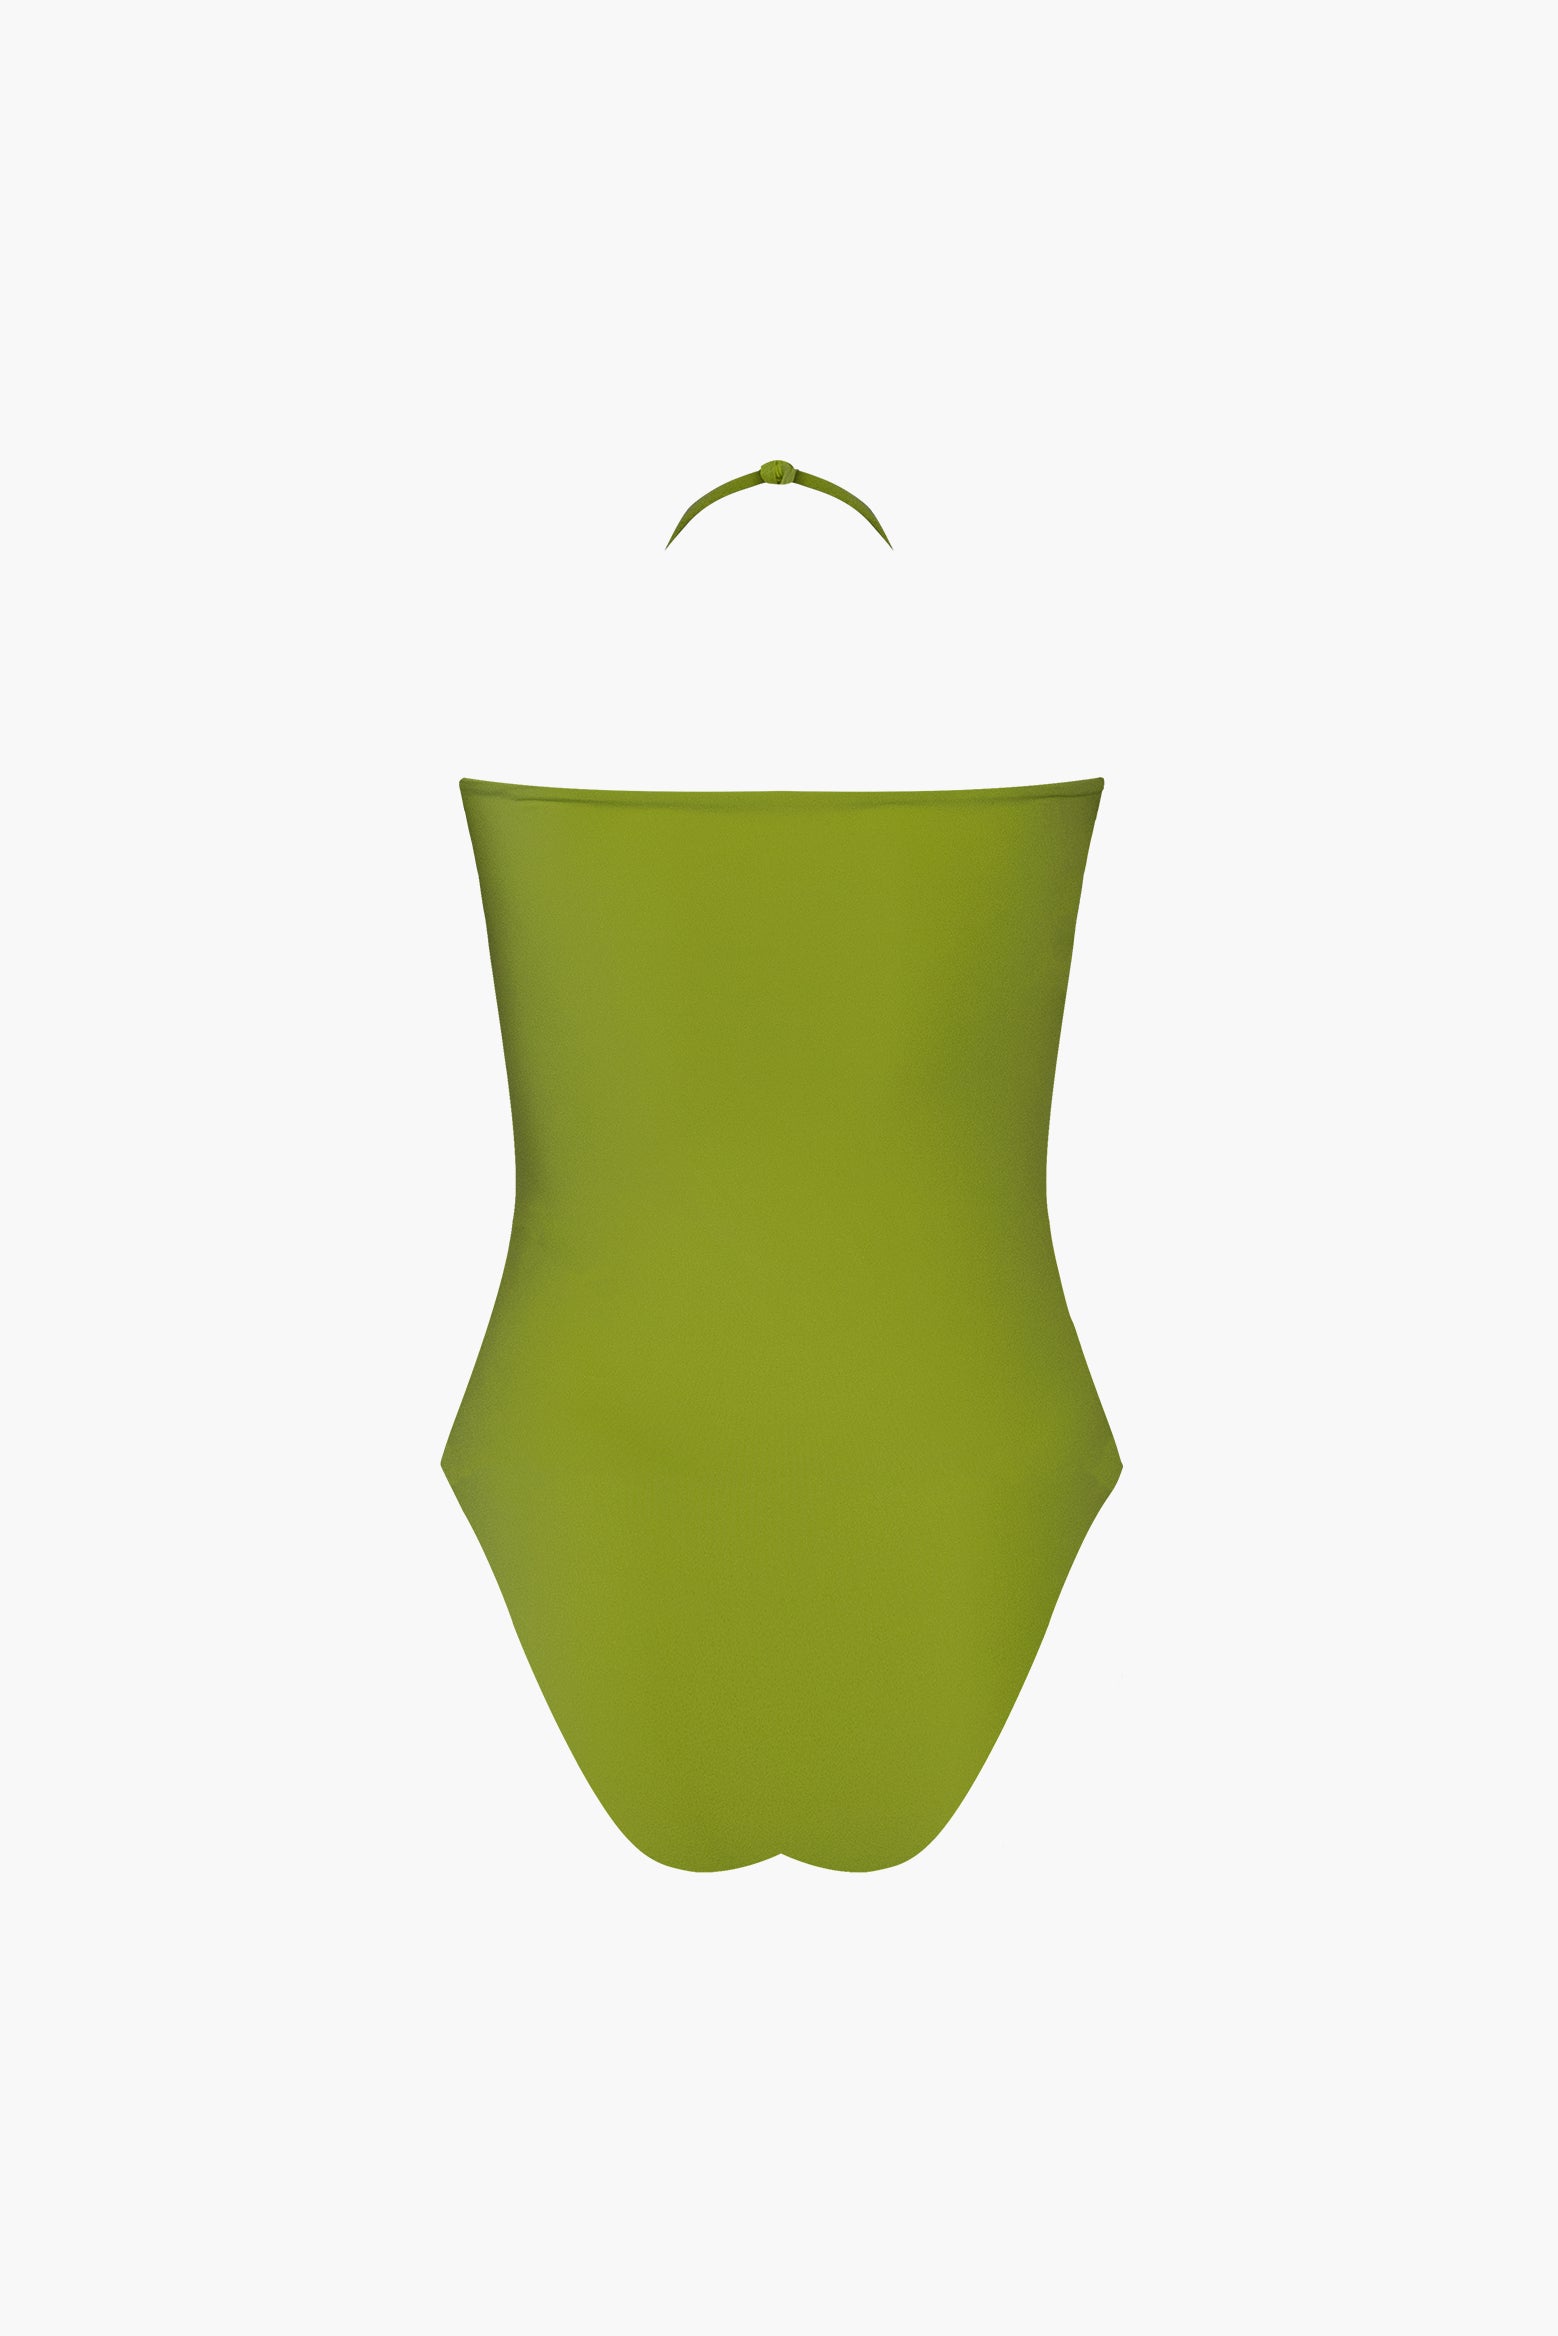 Maygel Coronel Fiora Swimsuit in Lemongrass available at The New Trend Australia.